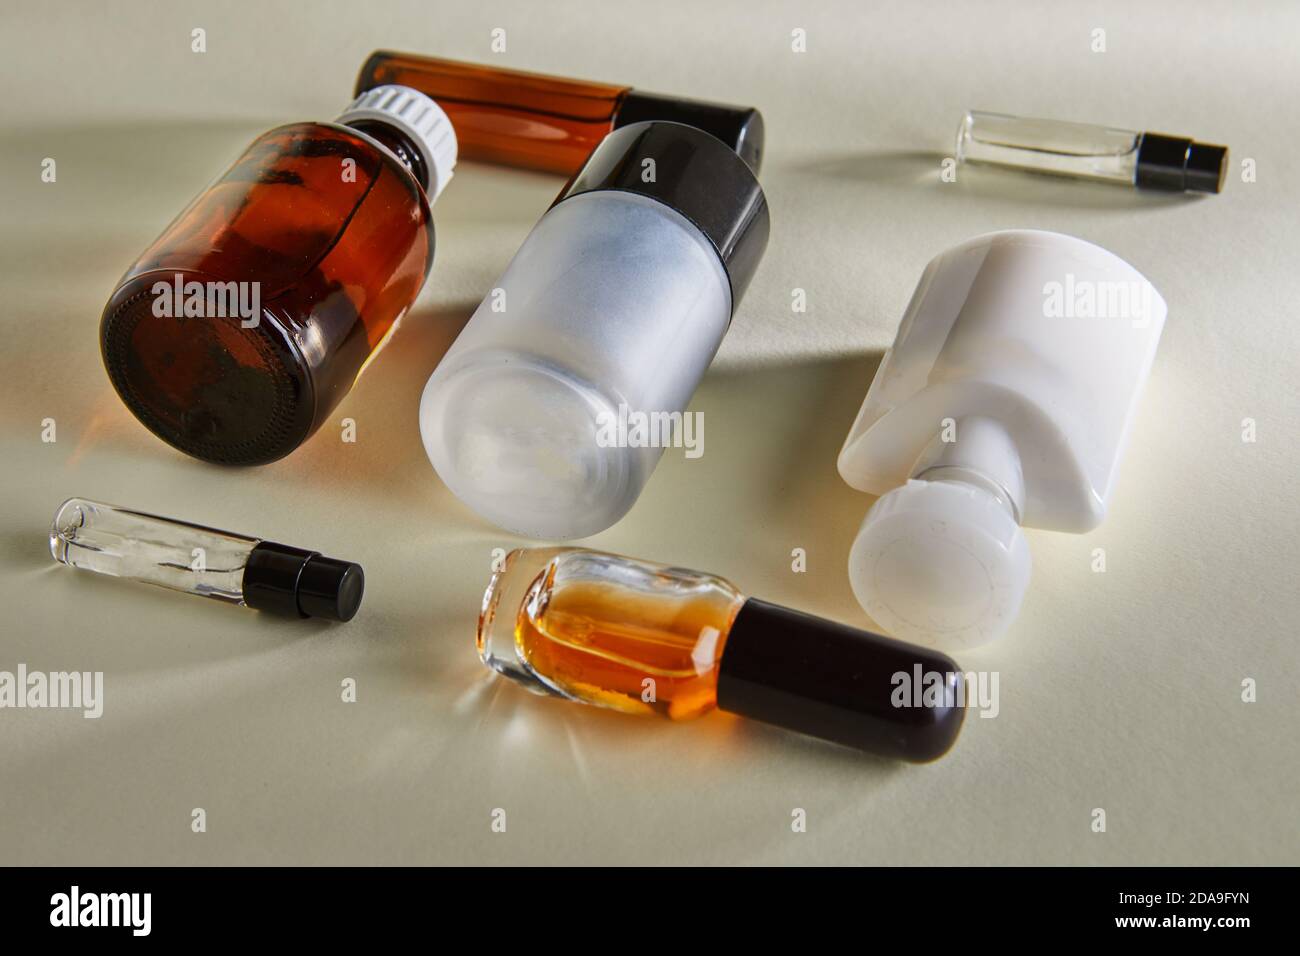 Variety of blanks for hand cream, perfumery, shower gel, bottles without labels on a white background with shadows. Stock Photo